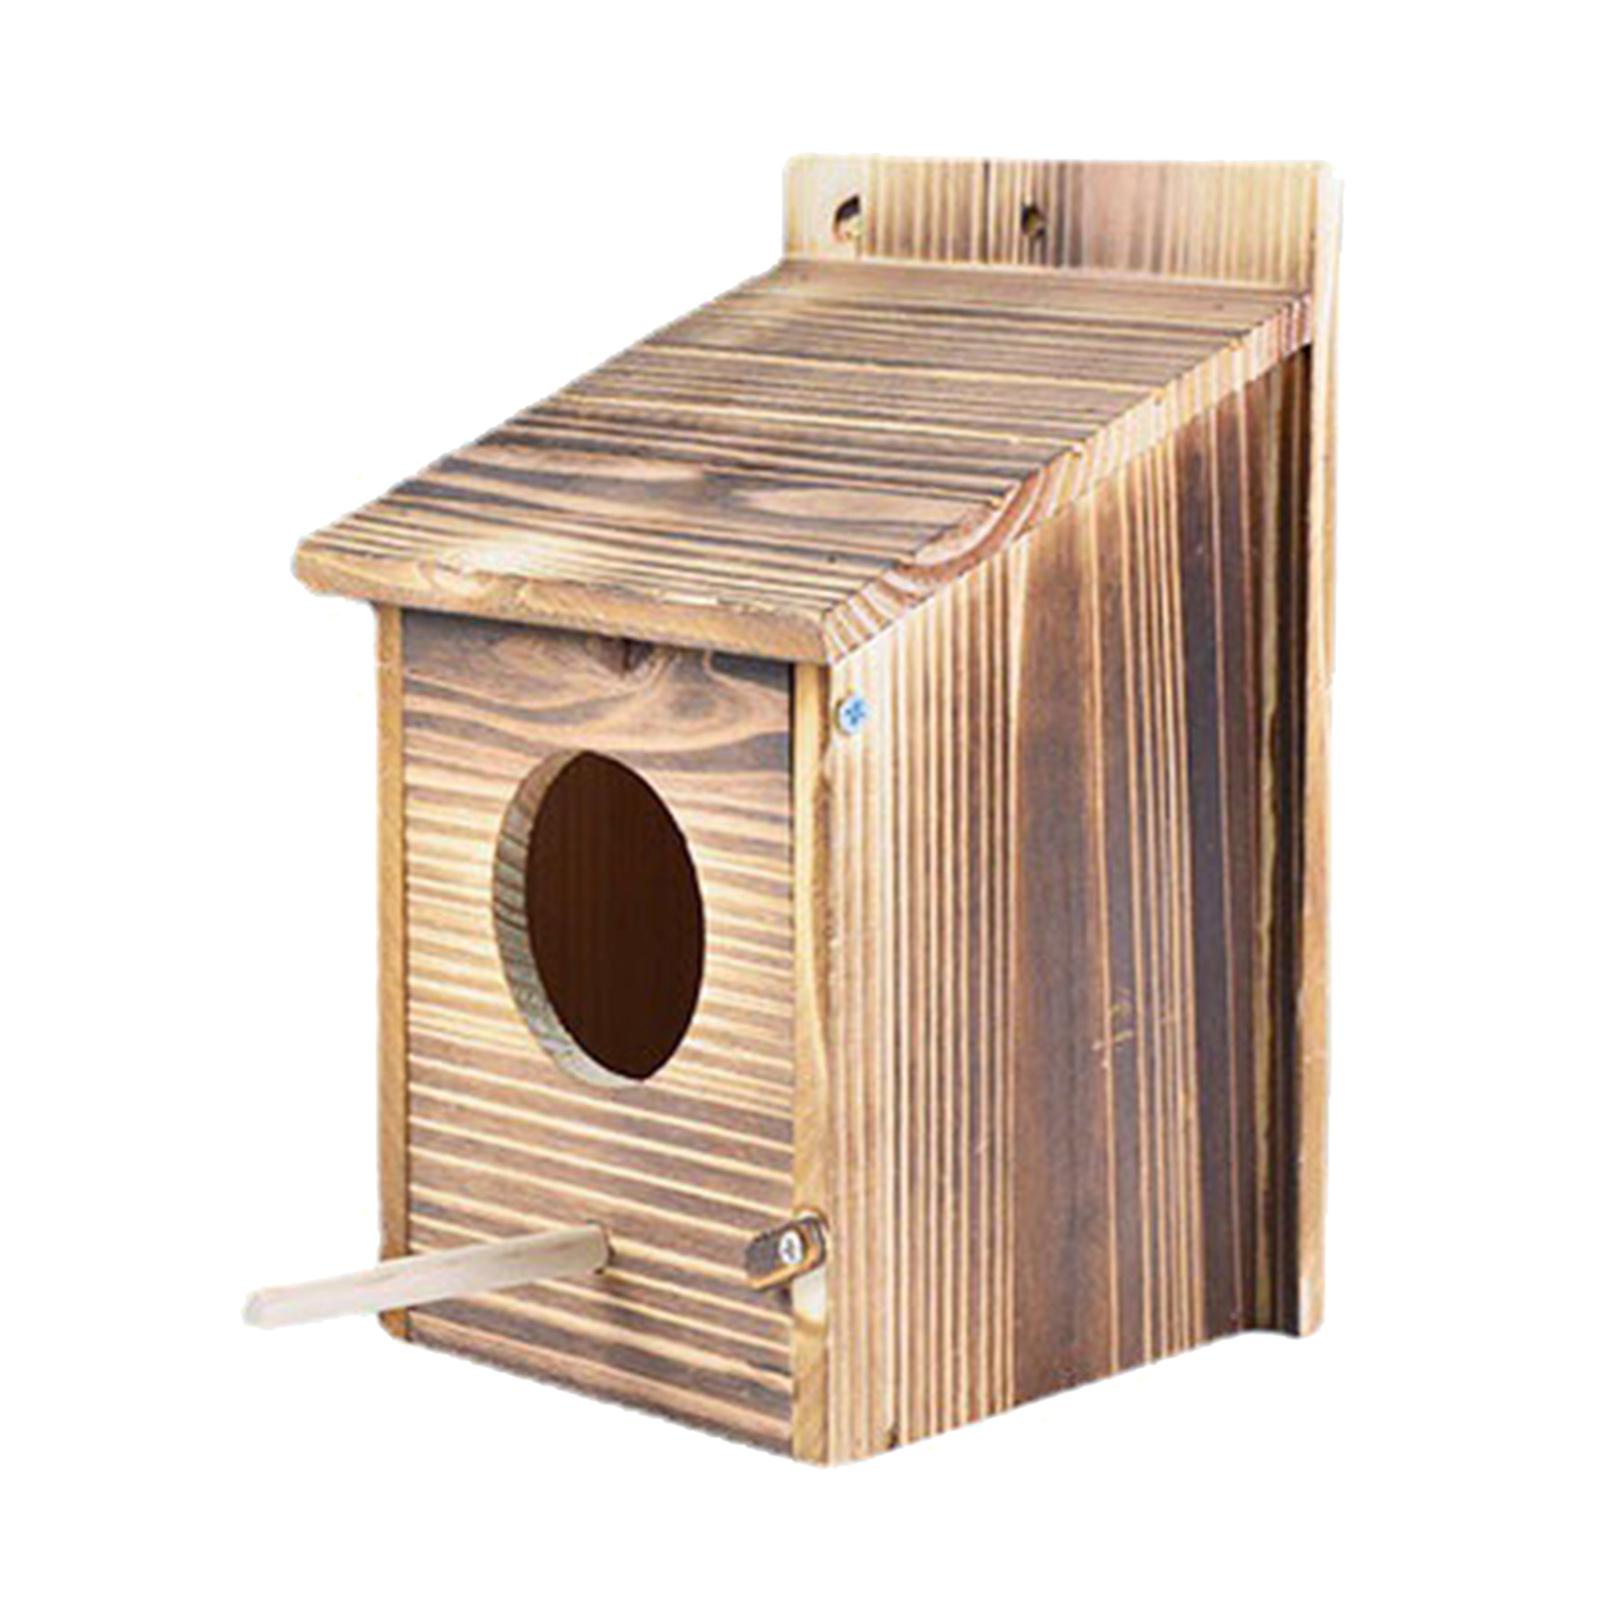 Bluebird House, Solid Wood Birdhouse, Weatherproof Bird House Designed Cleaning, Latch, , Fledgling Grooves - image 2 of 9